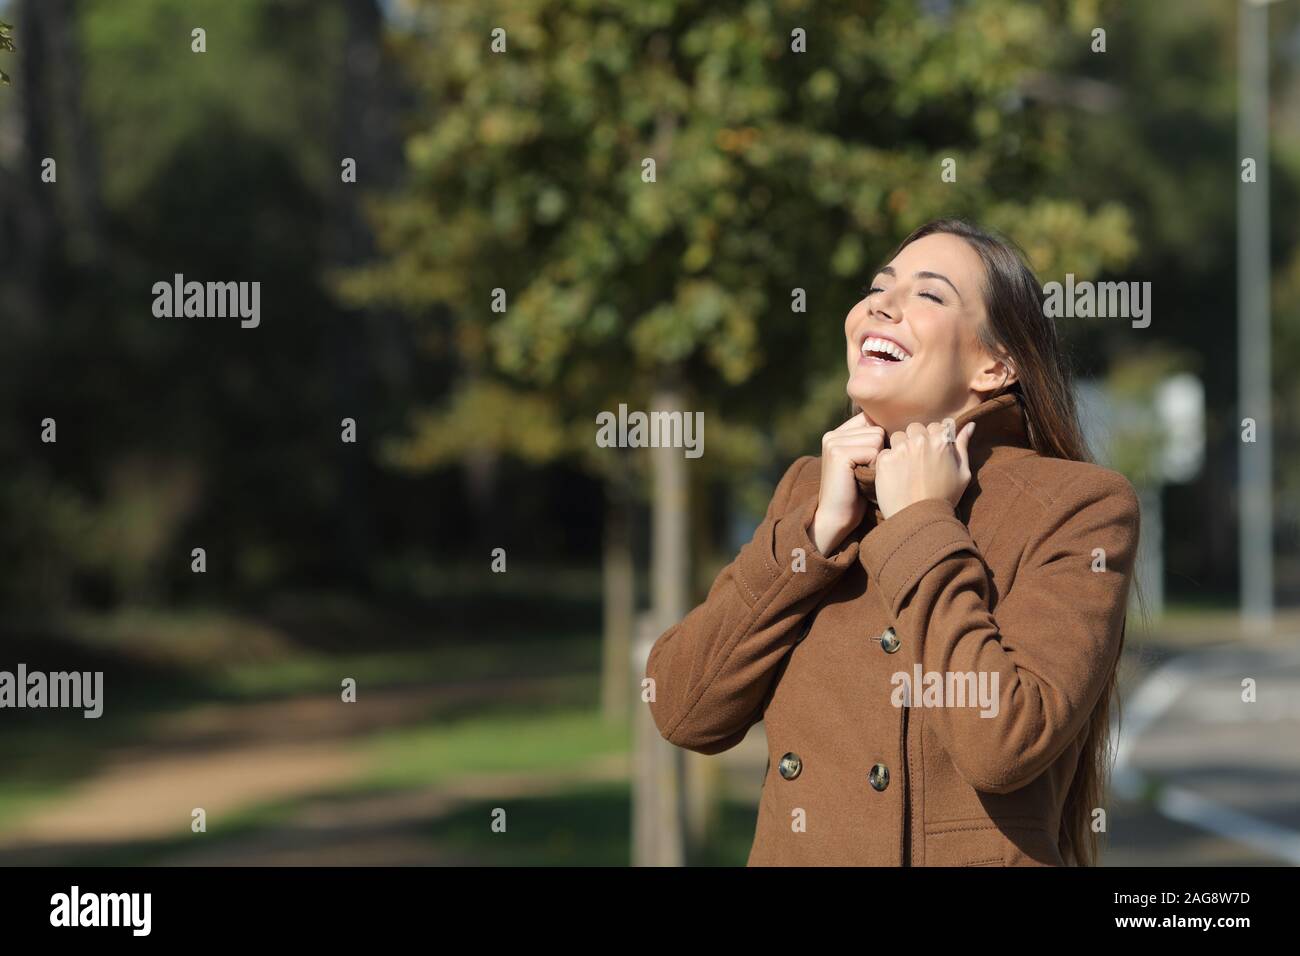 Happy woman warmly clothed in winter breathing fresh air standing in a park Stock Photo